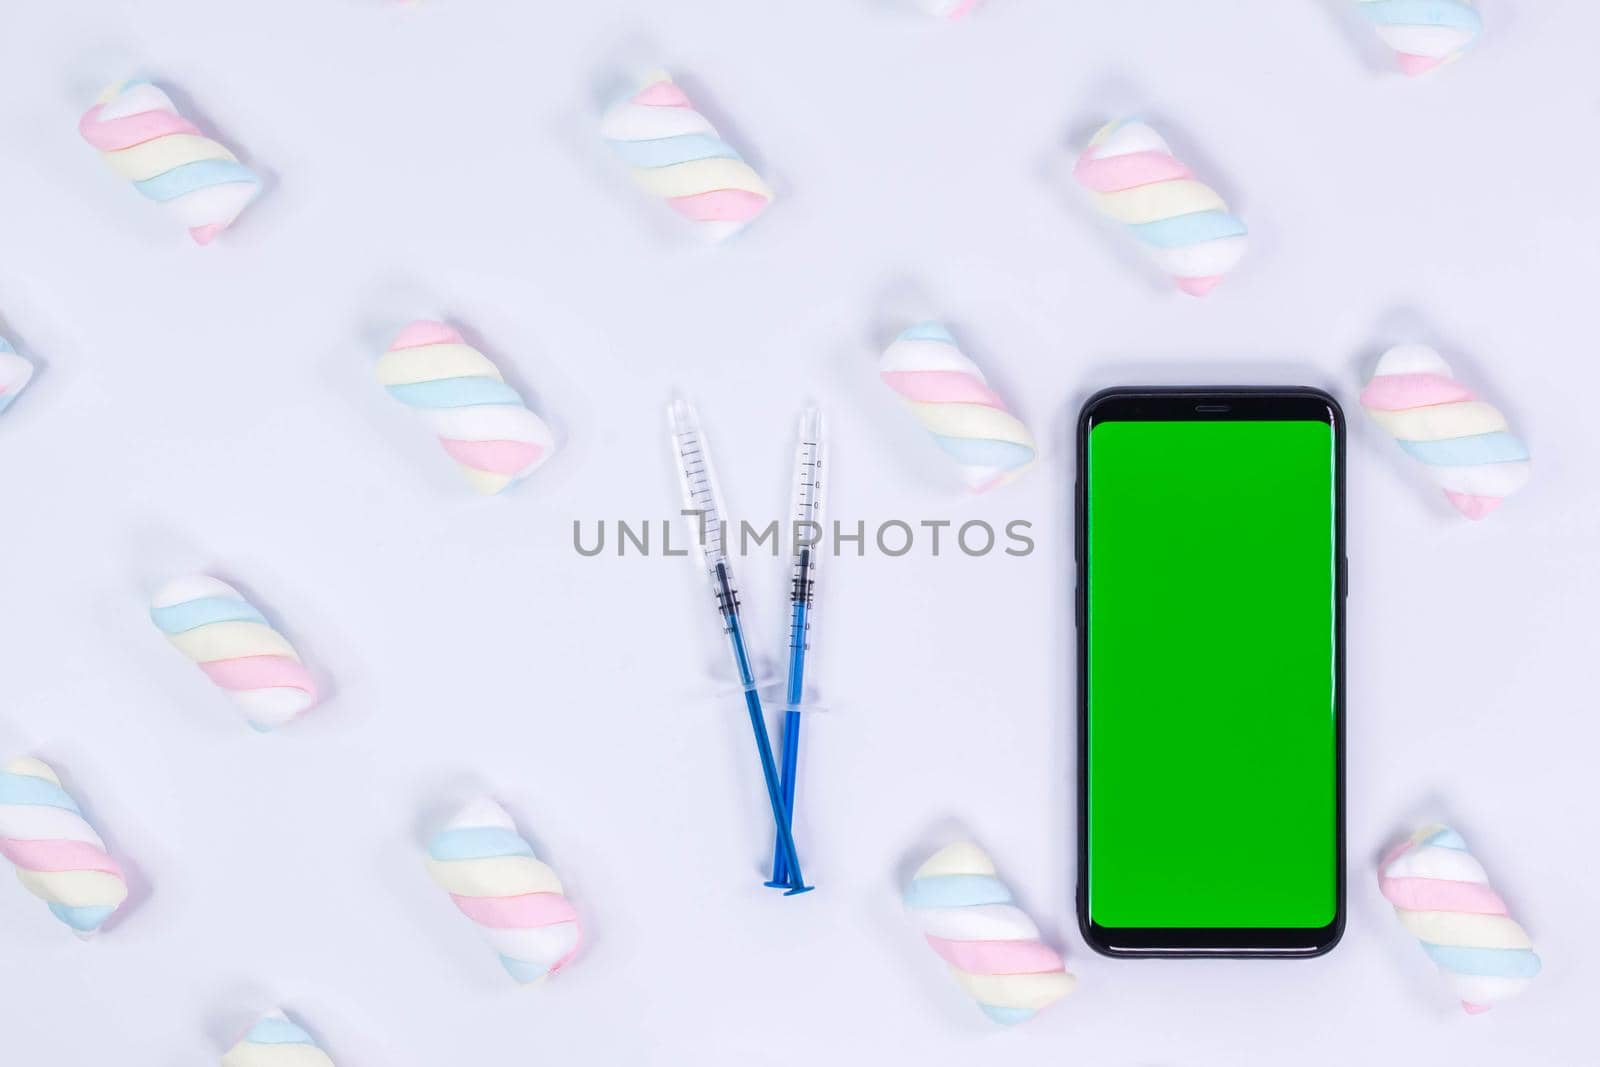 Phone mockup. Syringe with needle and black smartphone with blank screen. White background with twisted marshmallow pattern. Mock up generic device by JuliaDorian